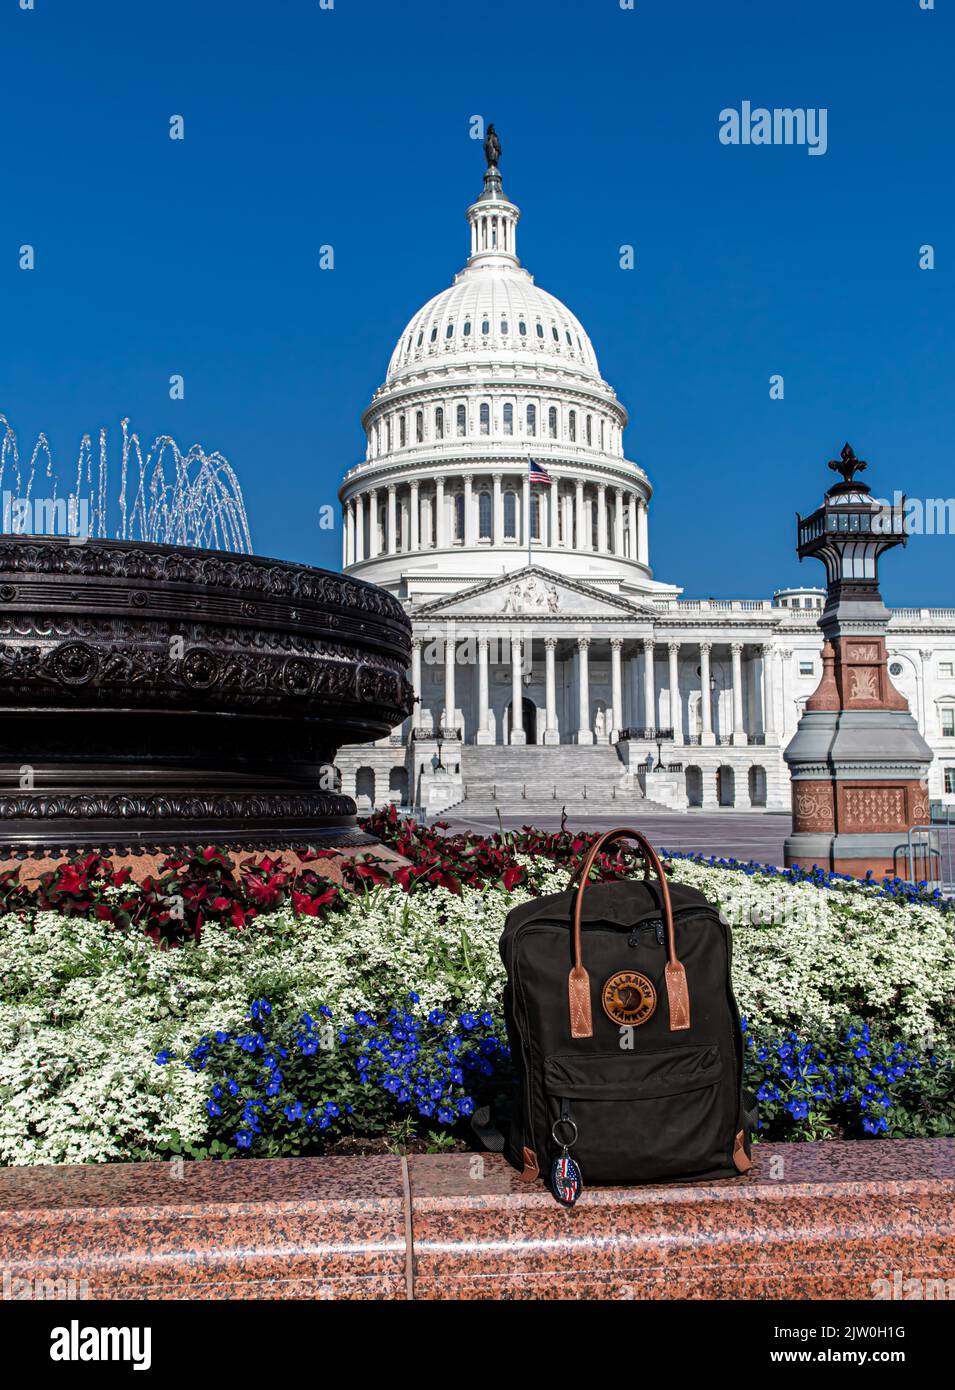 Swedish Fjällräven kånken backpack in front of a view of the Capitol building on Capitol Hill, District of Colombia, Washington D.C. Stock Photo